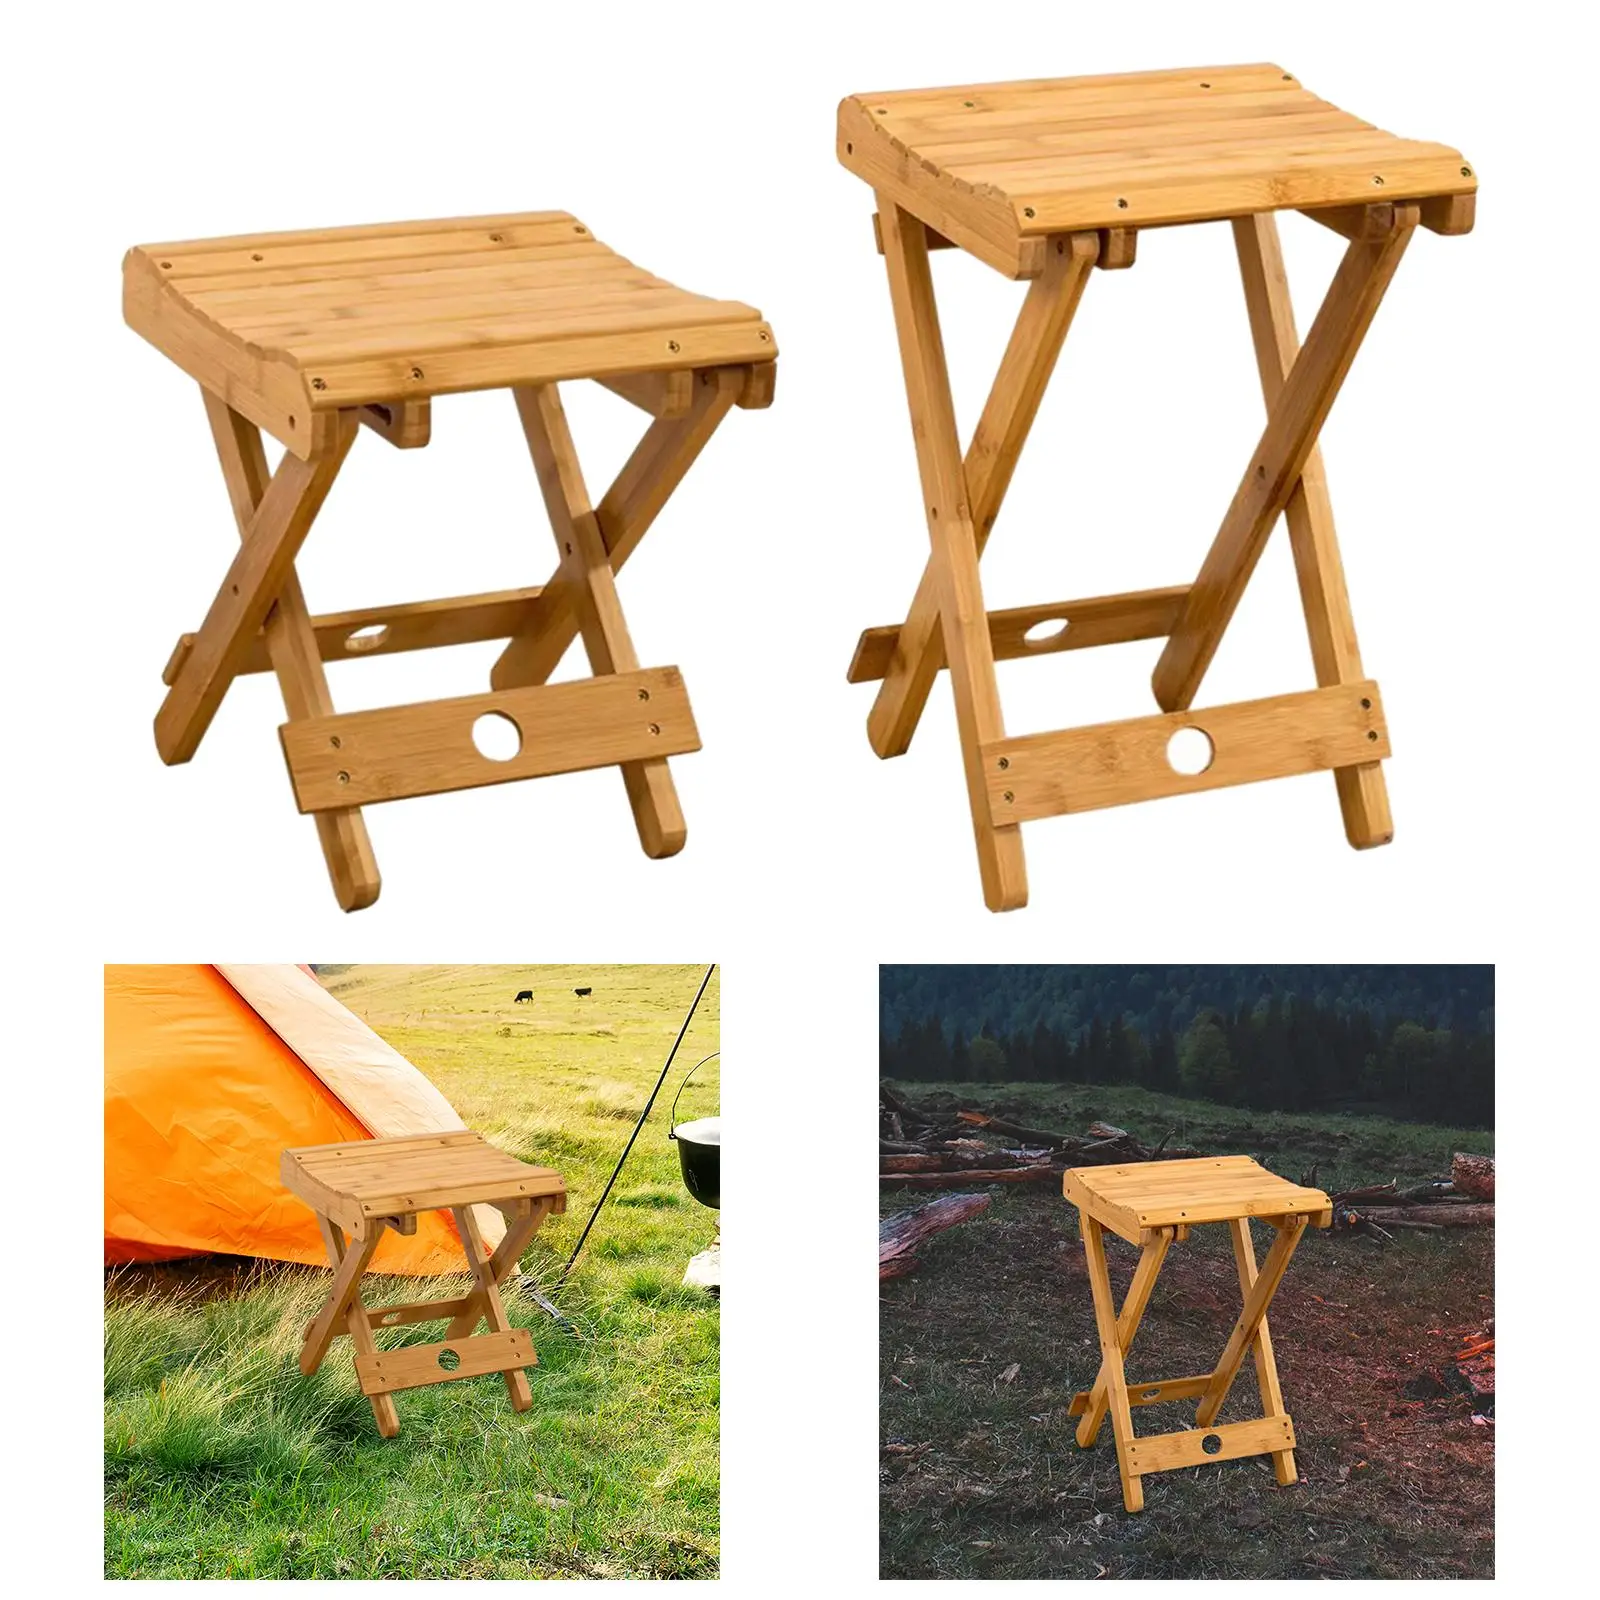 Folding Stool Camp Stool Collapsible Lightweight Ultralight Outside Fishing Chair for Beach Garden Patio Backpacking Hiking